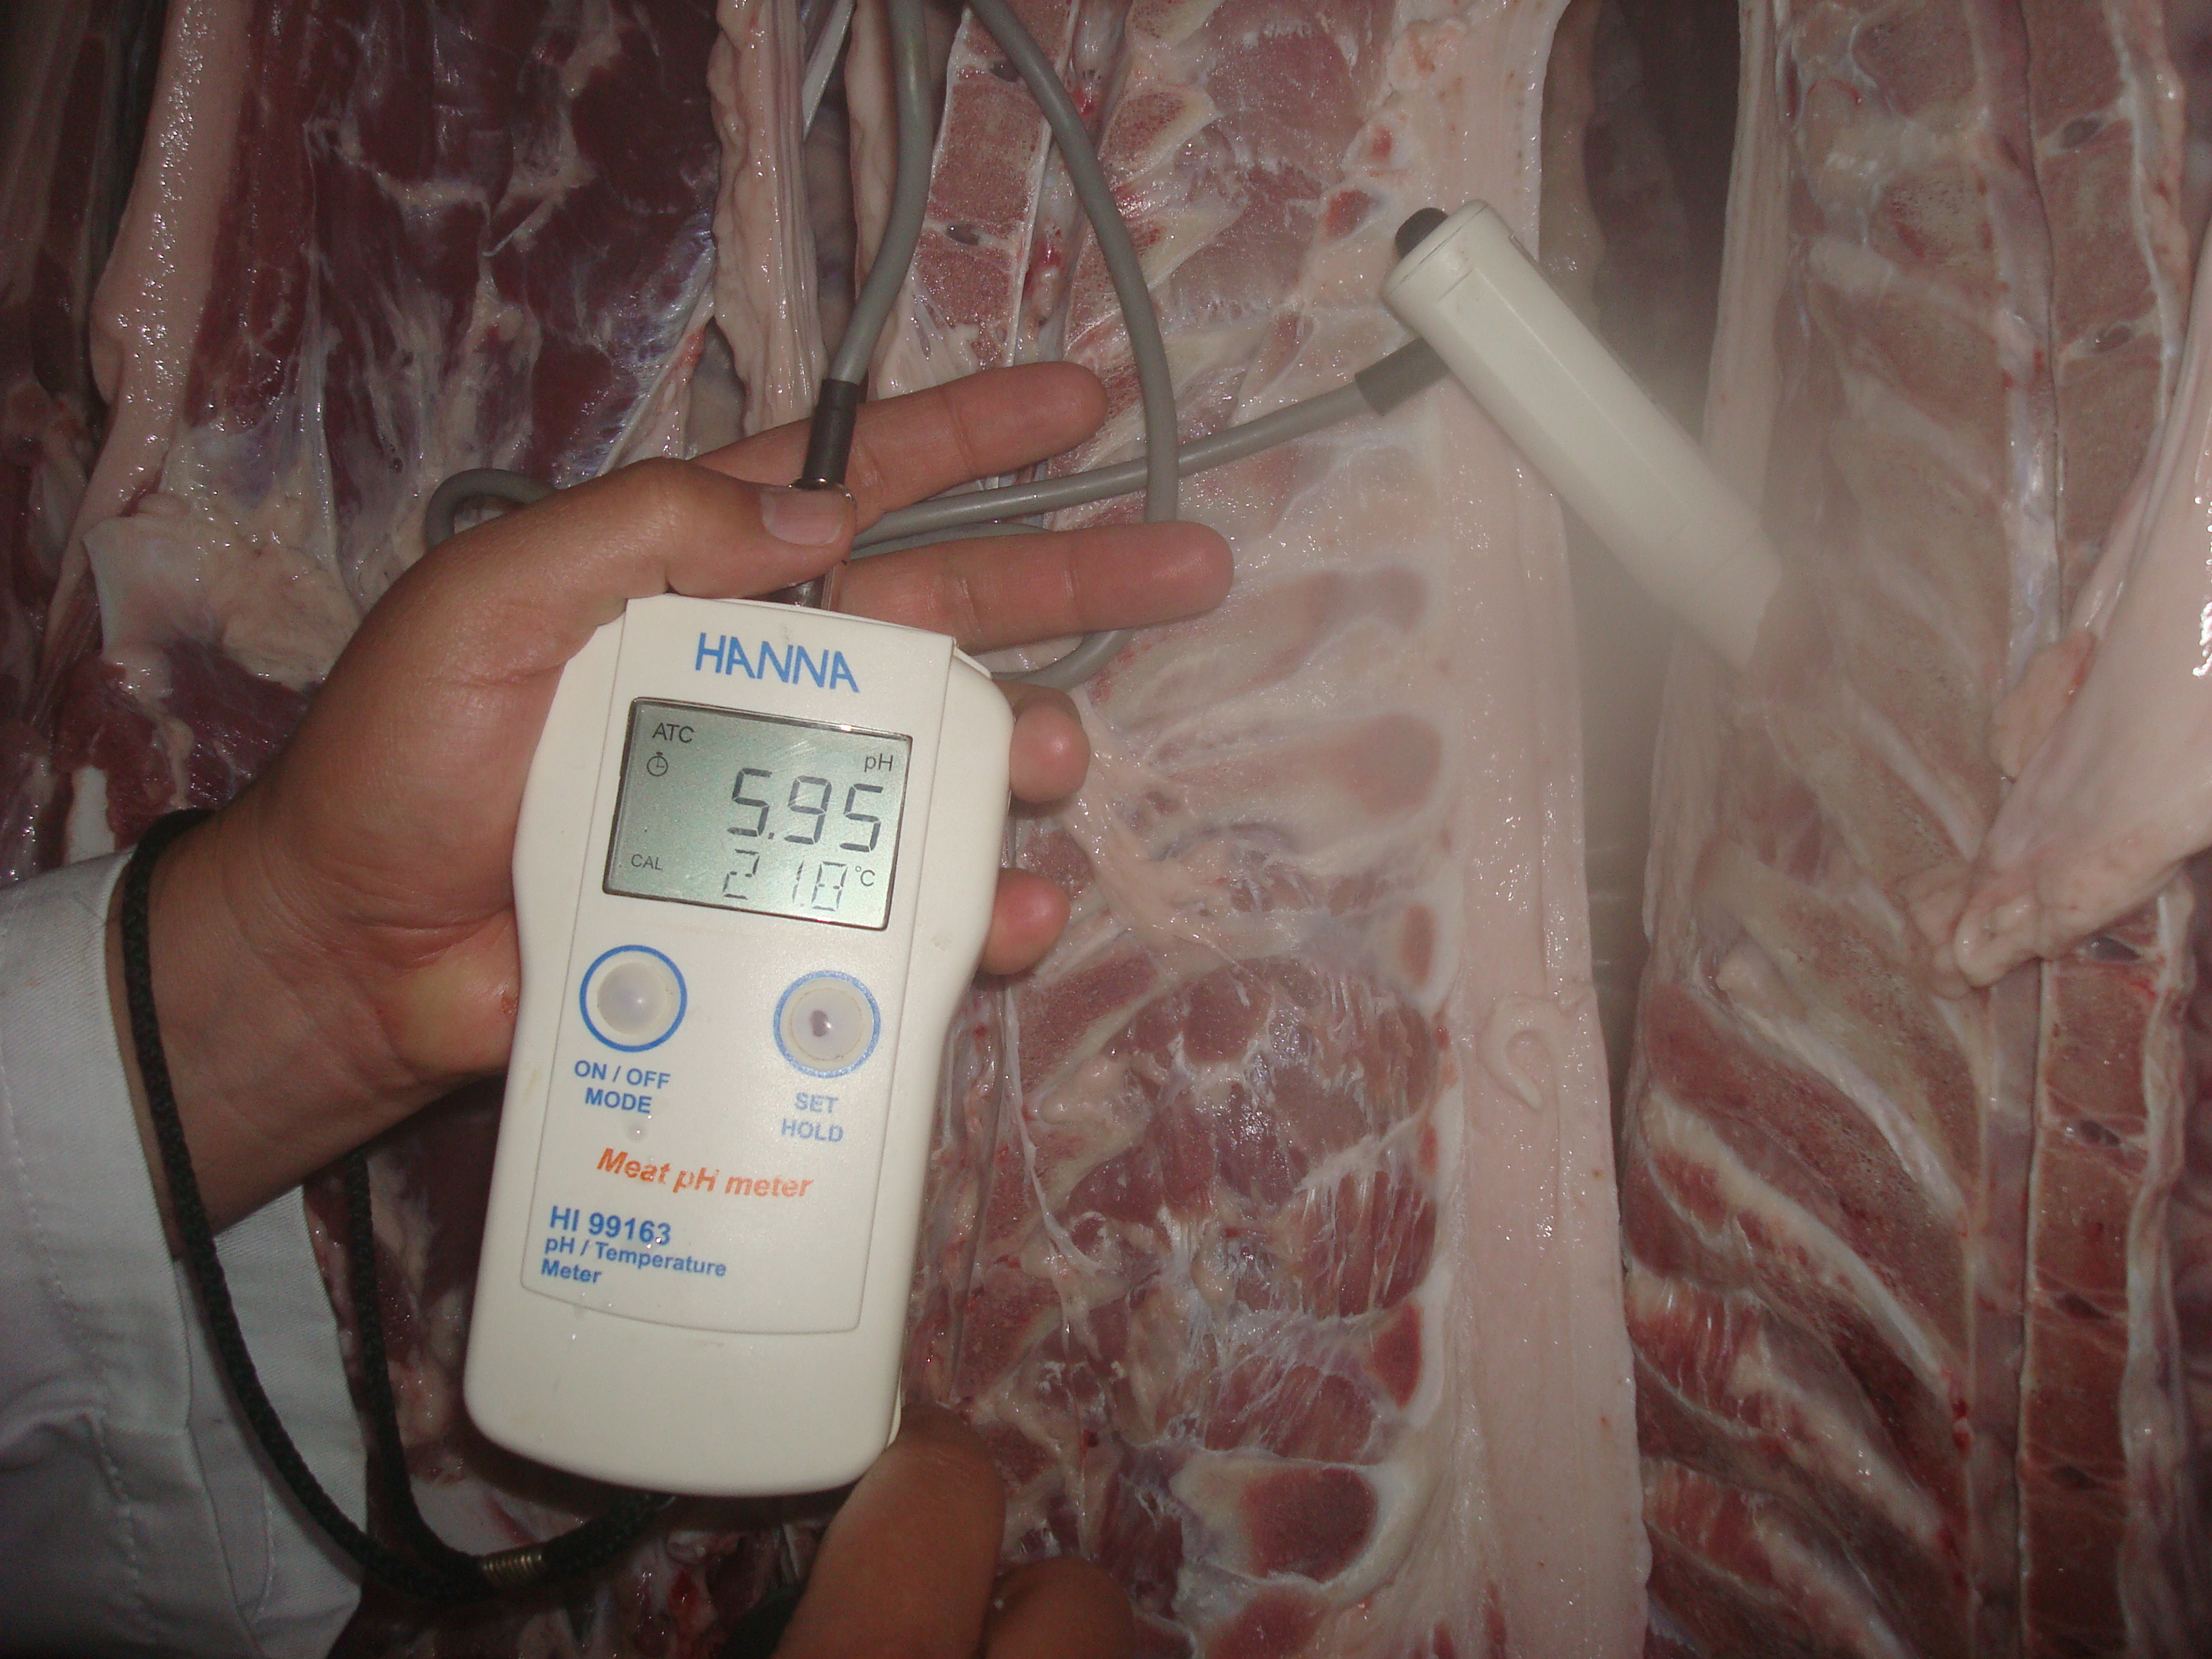 Rapid pH decline can result in PSE (pale soft exudative) meat